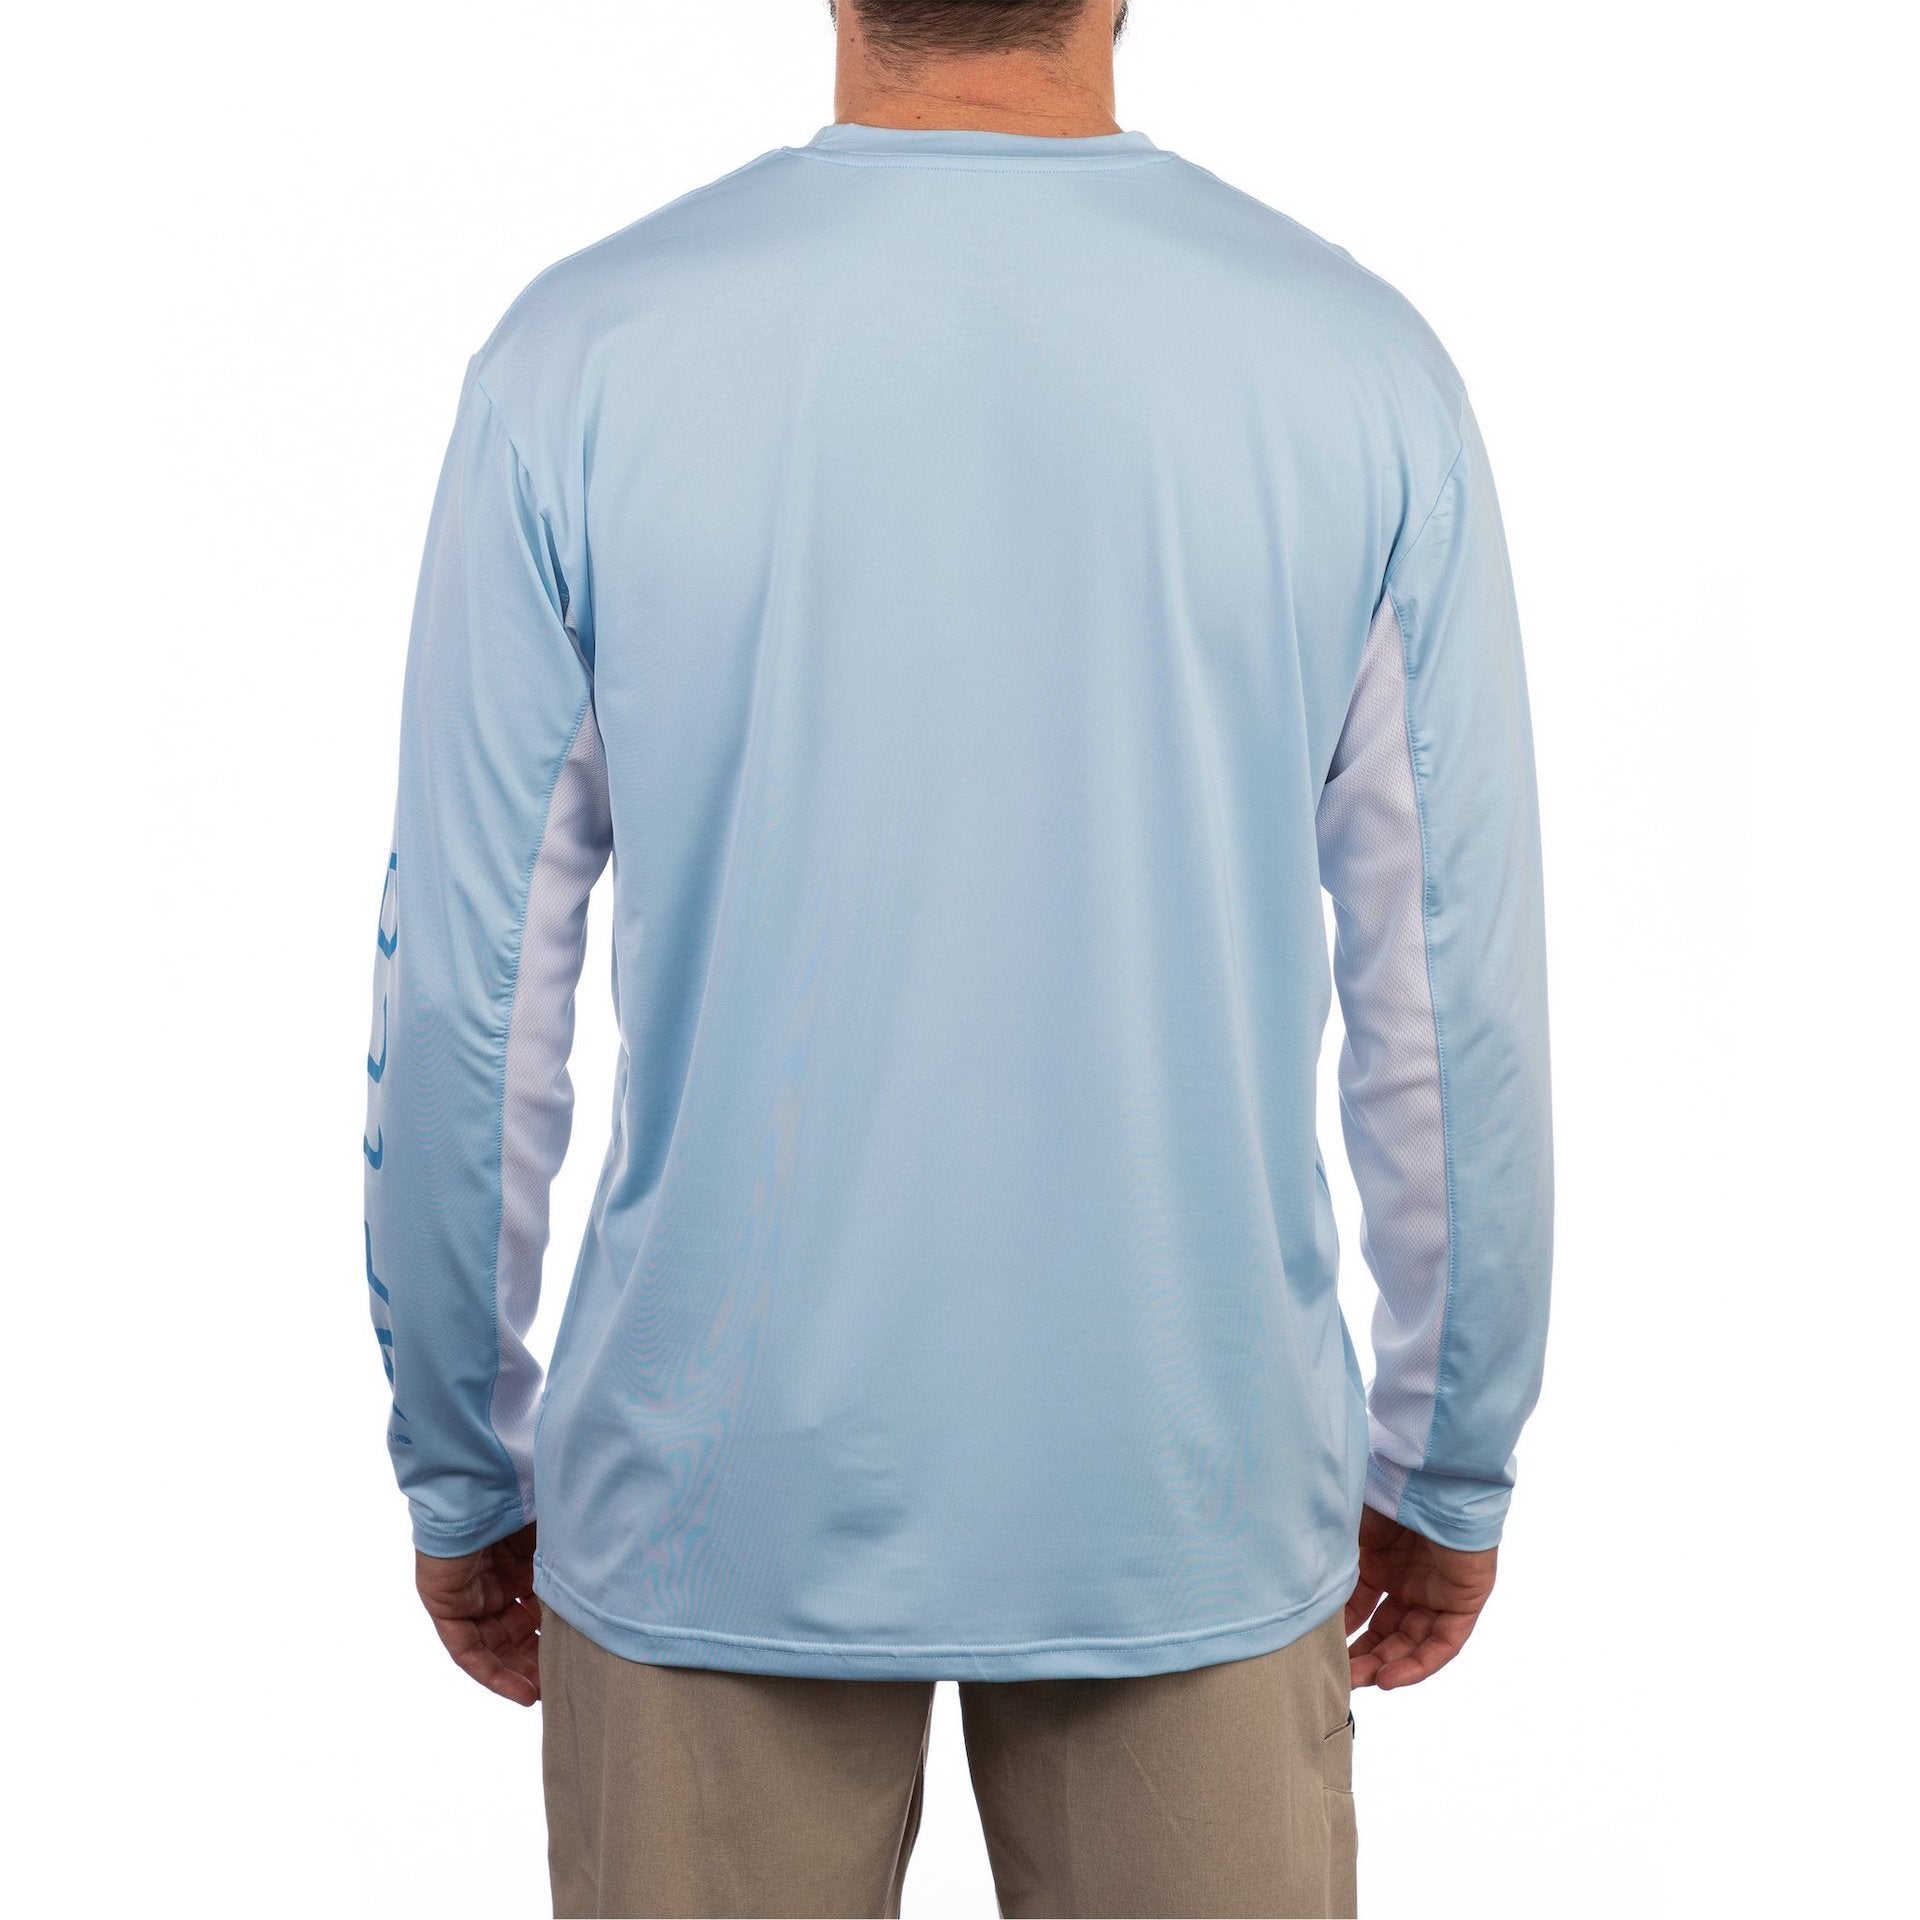 AFTCO Cypher Performance Long Sleeve Shirt